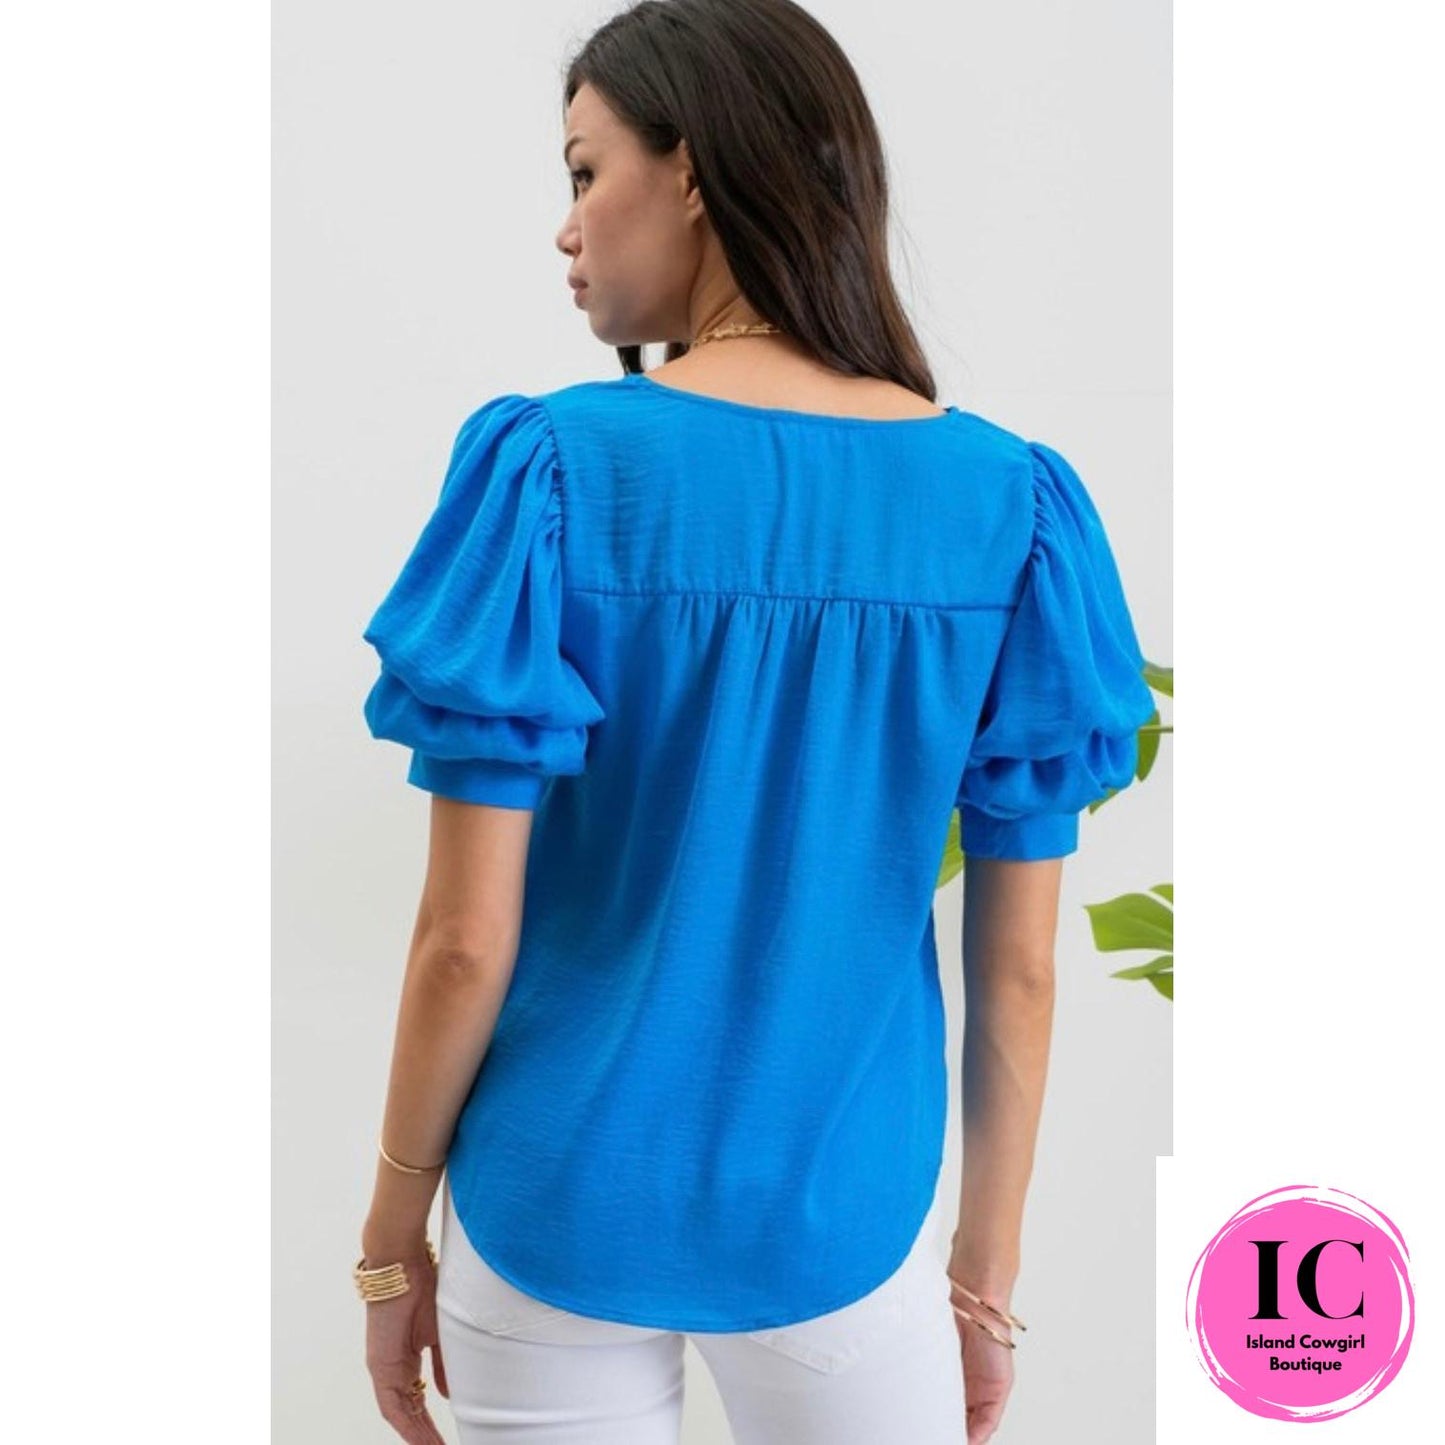 Lovely New Day Turquoise Blouse